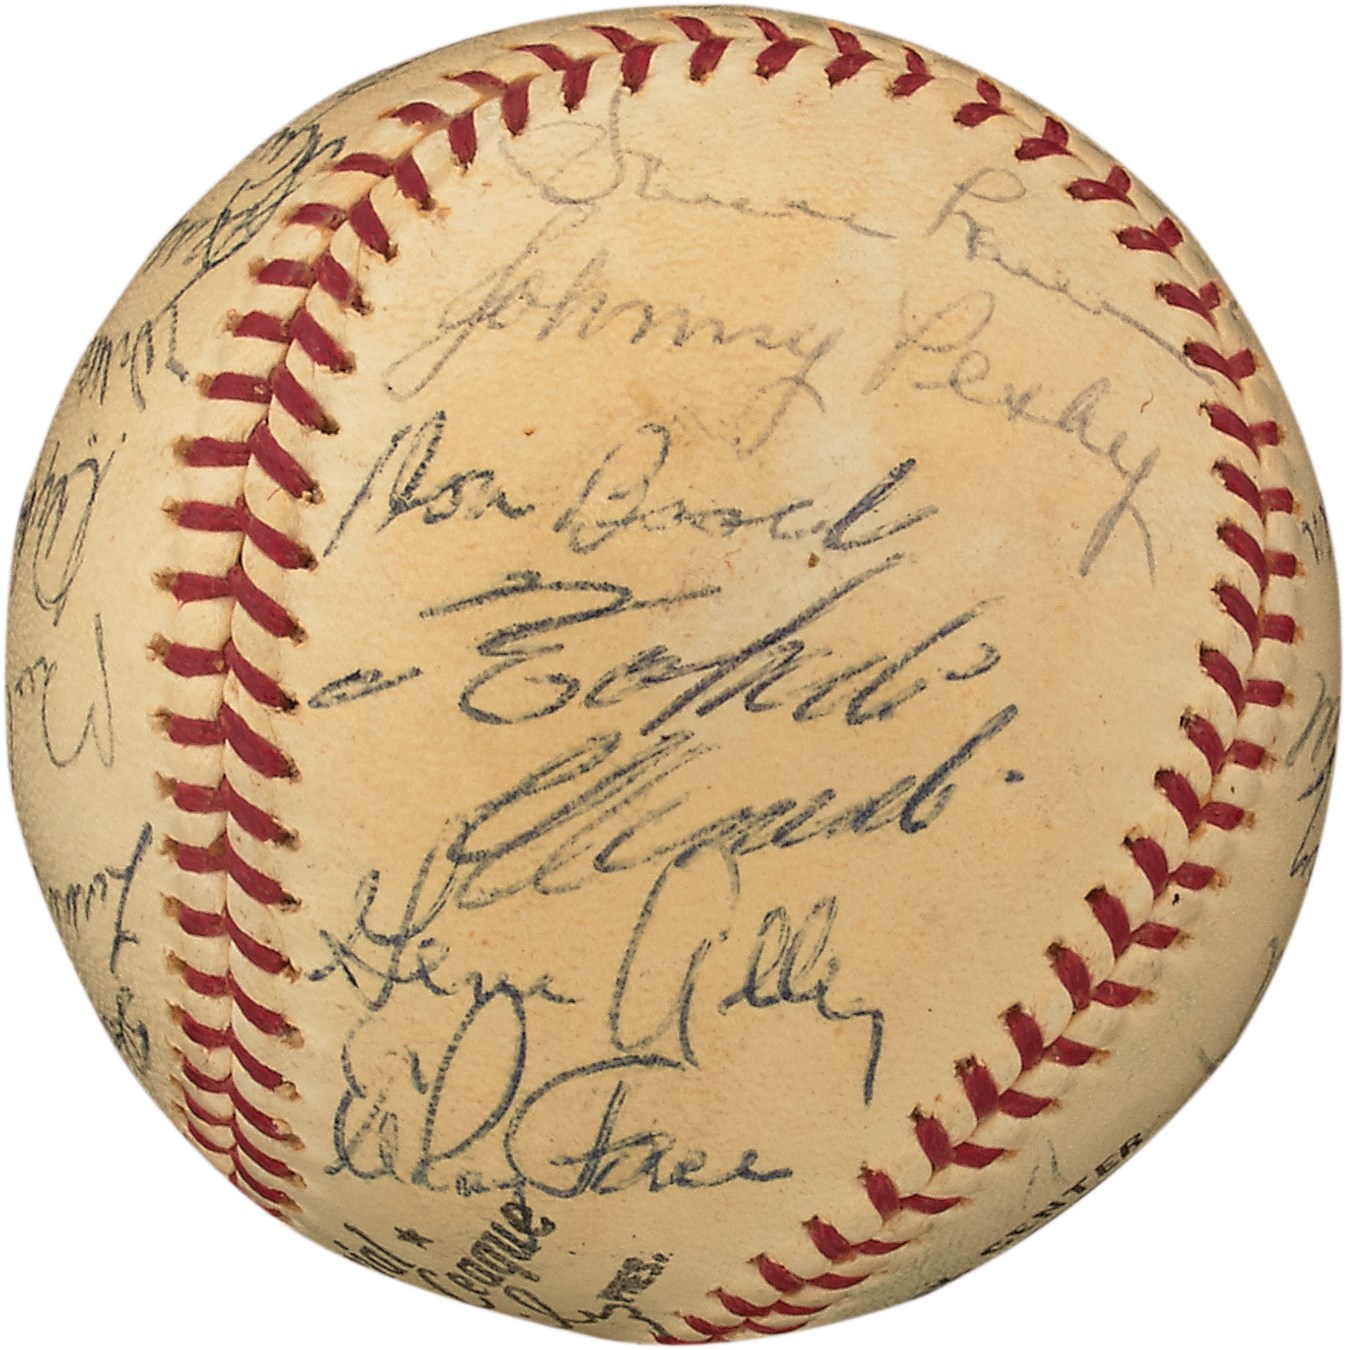 - 1966 Pittsburgh Pirates Team Signed Baseball with Roberto Clemente from MLer R. Hal Smith (PSA)